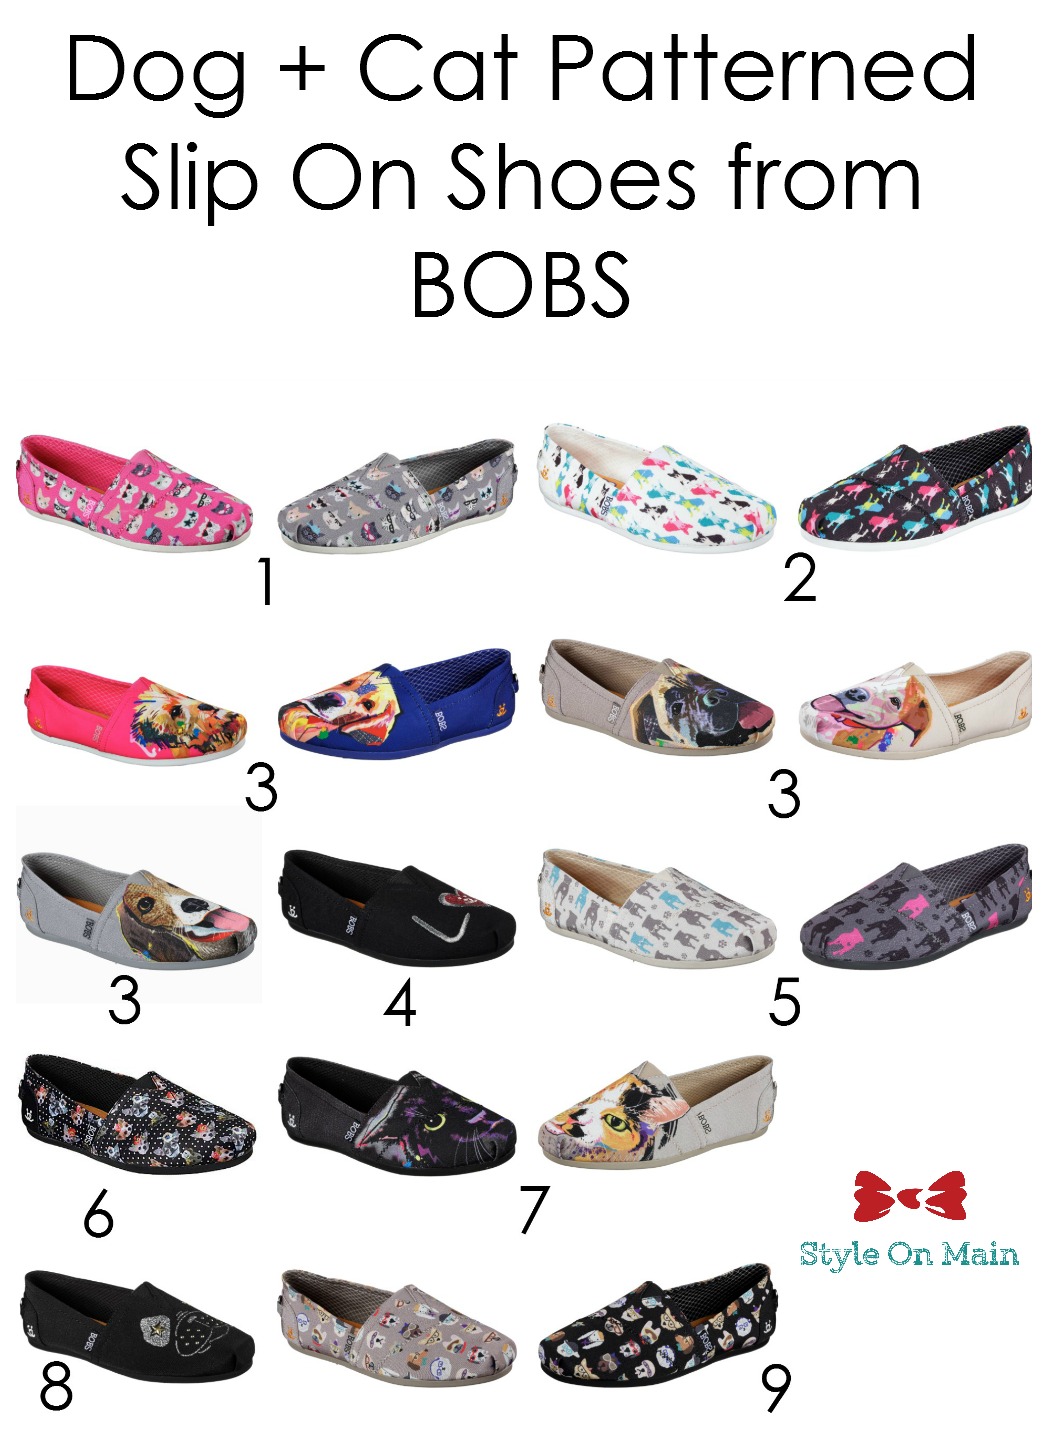 Dogs and Cats Printed Shoes from BOBS by Skechers. 